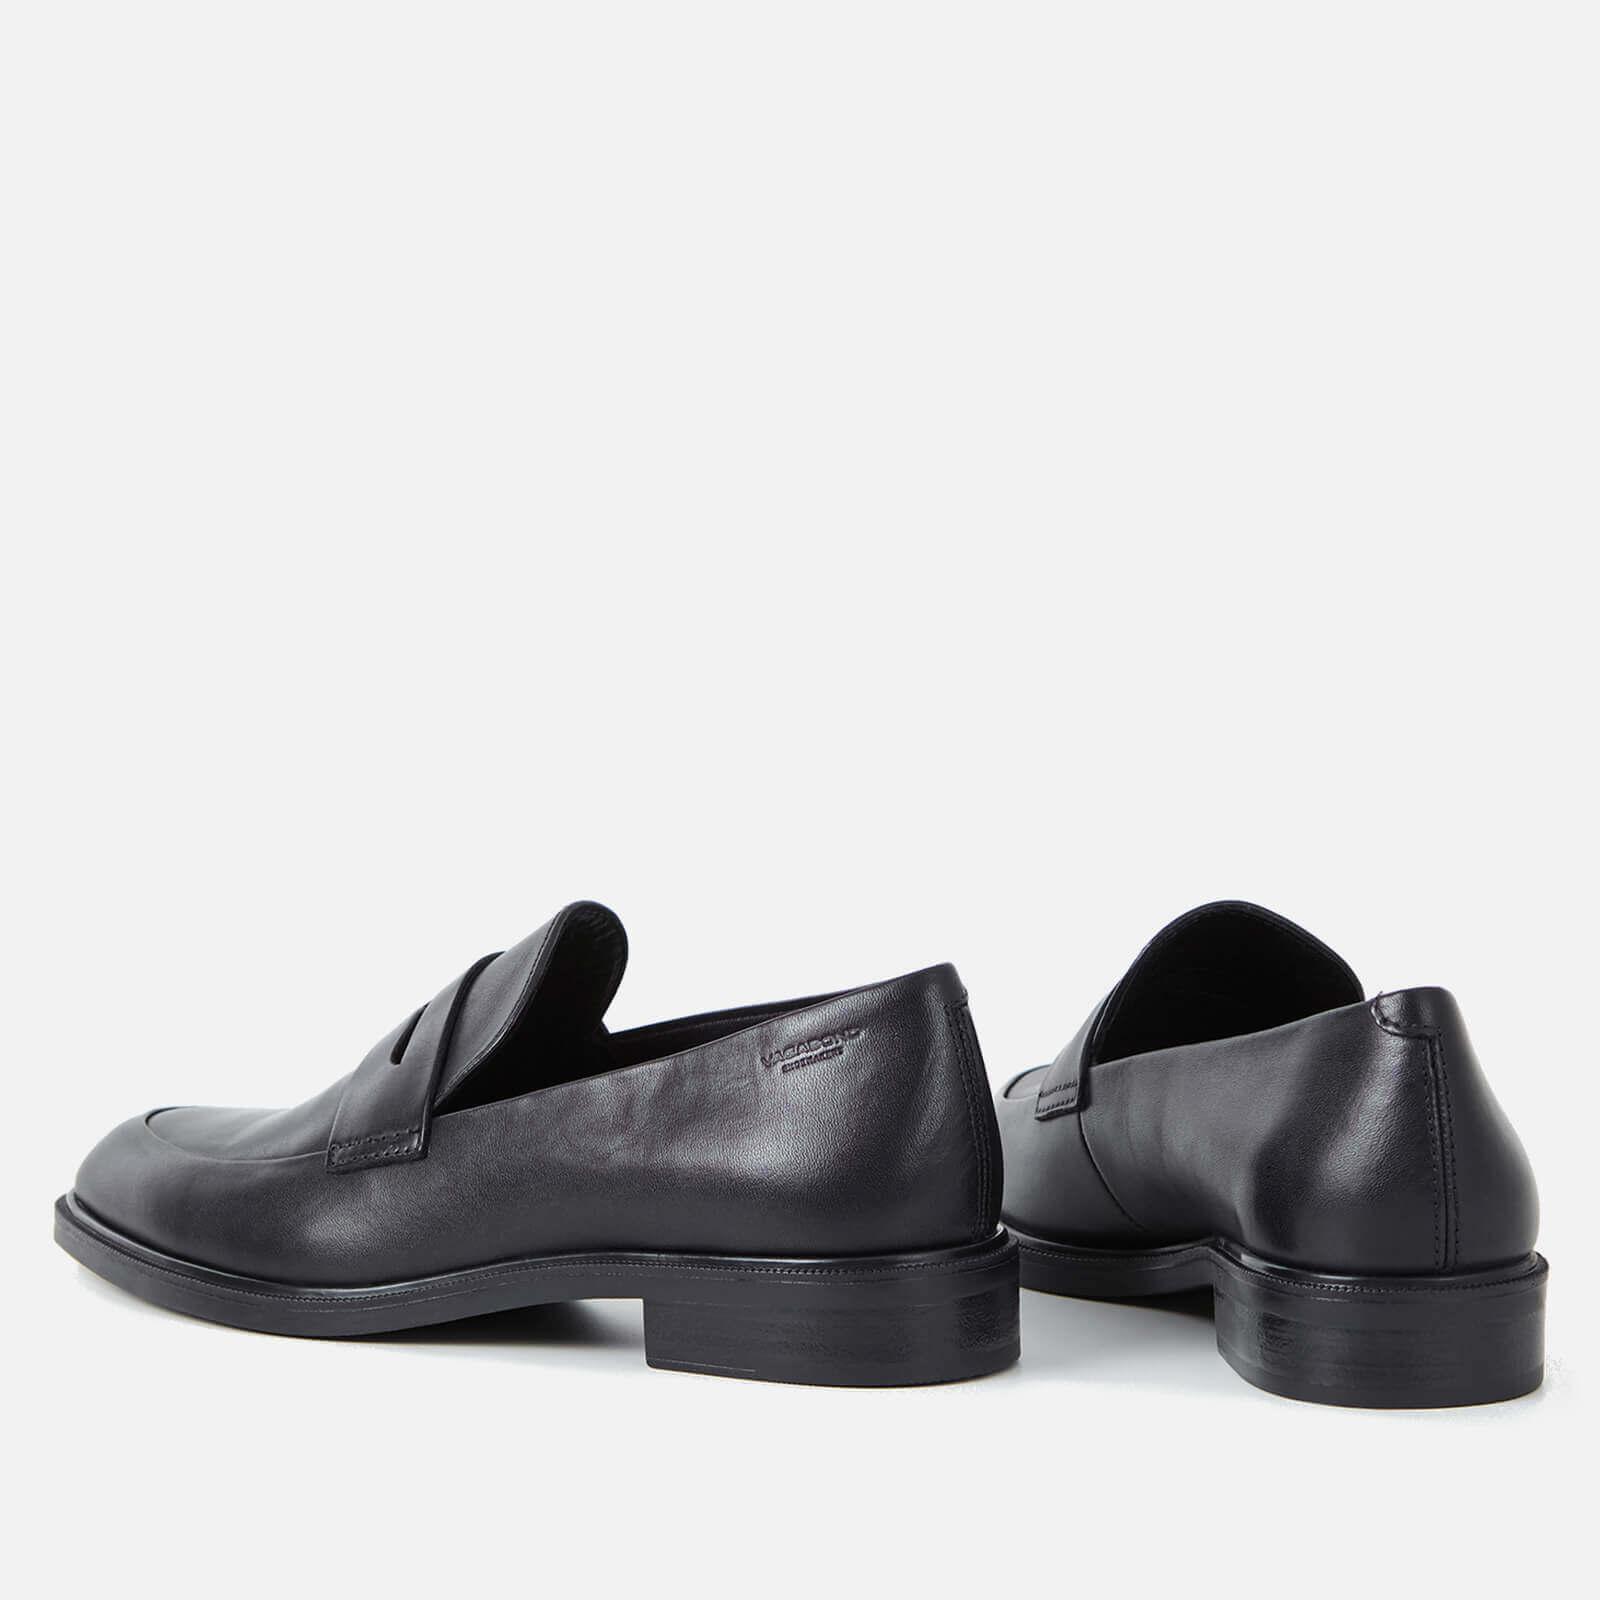 arve Kosciuszko acceleration Vagabond Shoemakers Frances Leather Loafers in Black | Lyst